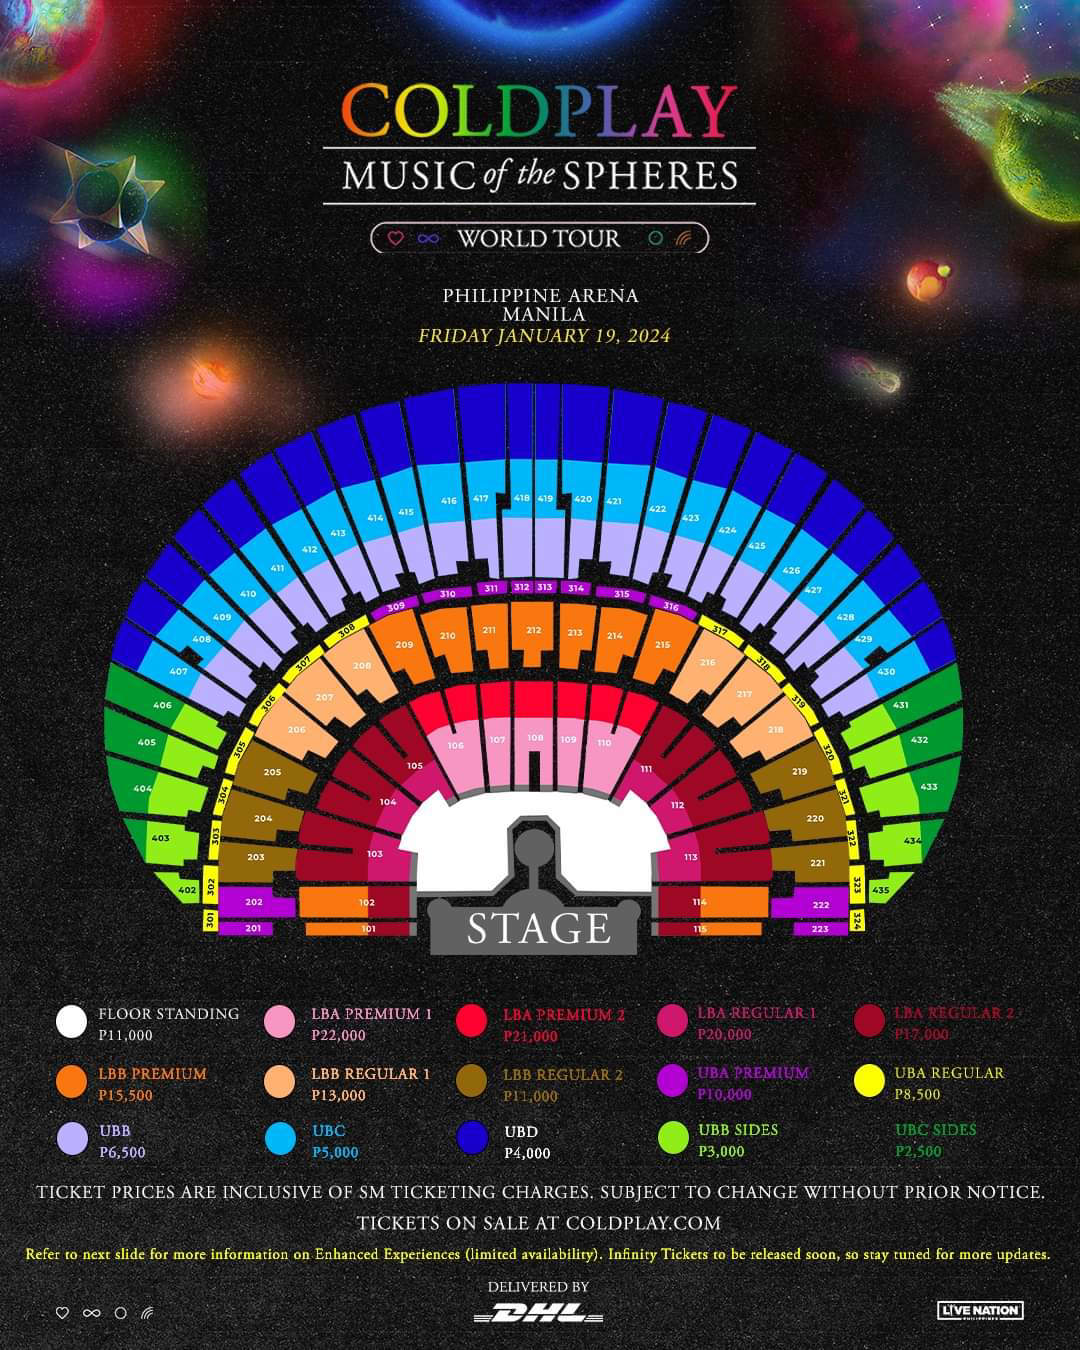 Coldplay releases ticket prices, seat plan for Manila concert in 2024